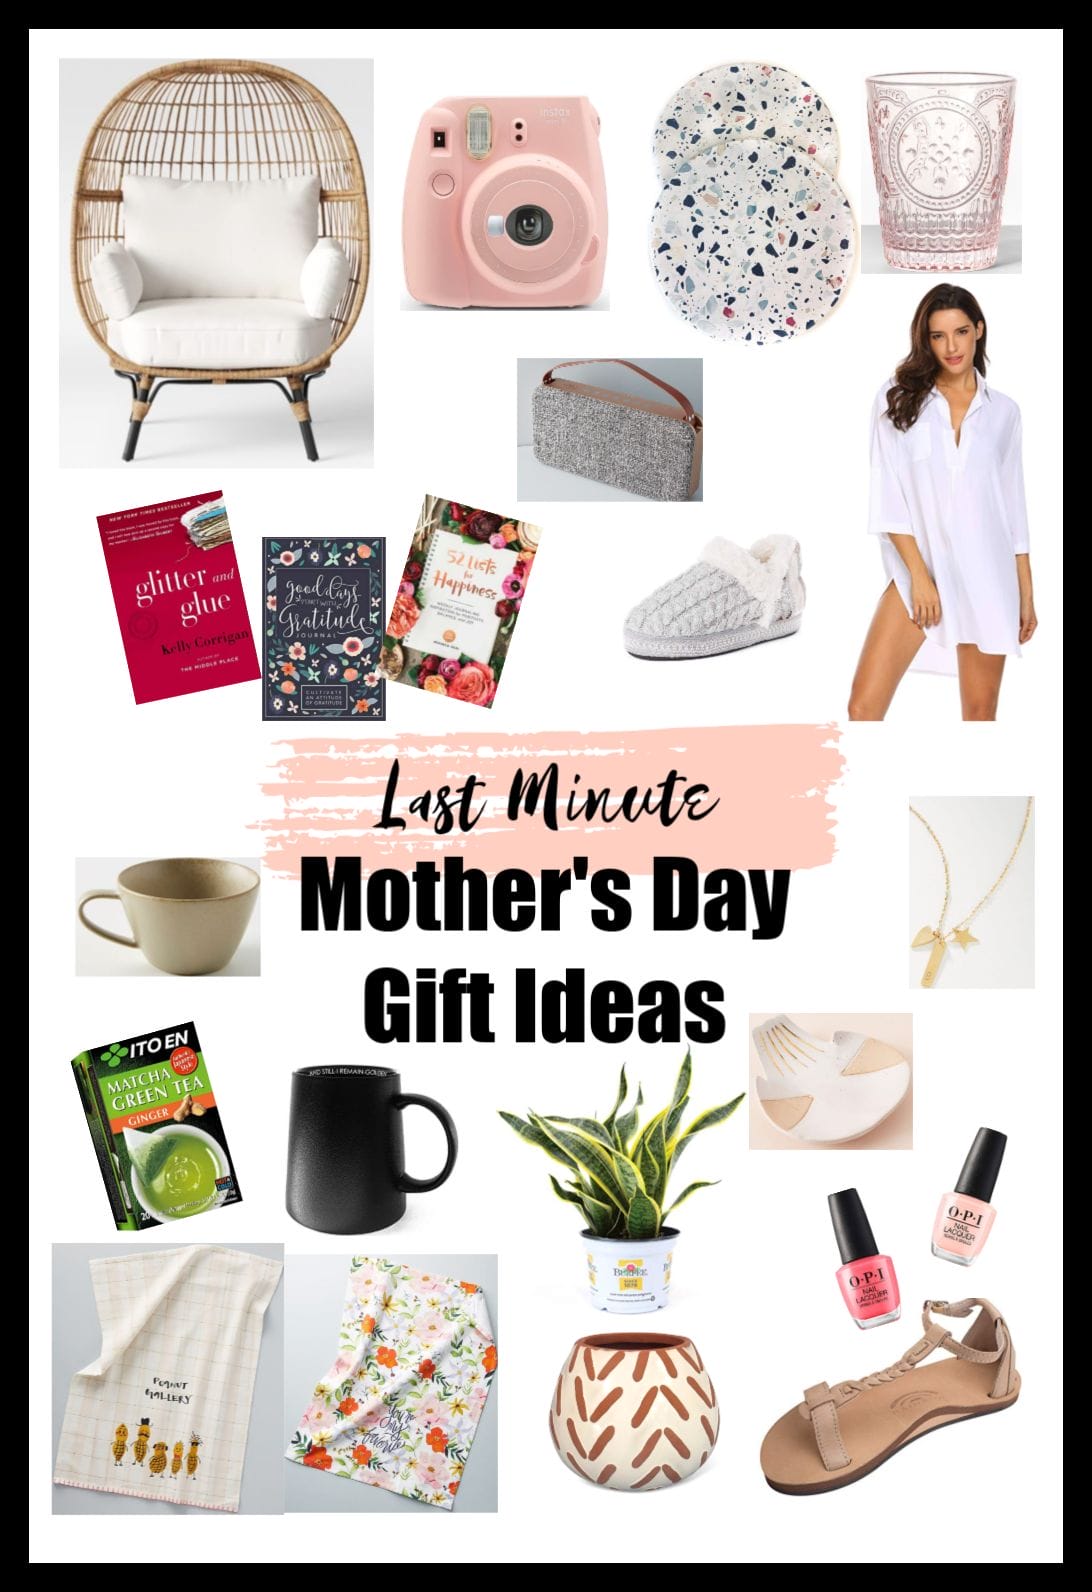 https://eyqutuda73b.exactdn.com/wp-content/uploads/2019/05/Mothers-Day-Last-Minute-Gift-Ideas.png?strip=all&lossy=1&ssl=1